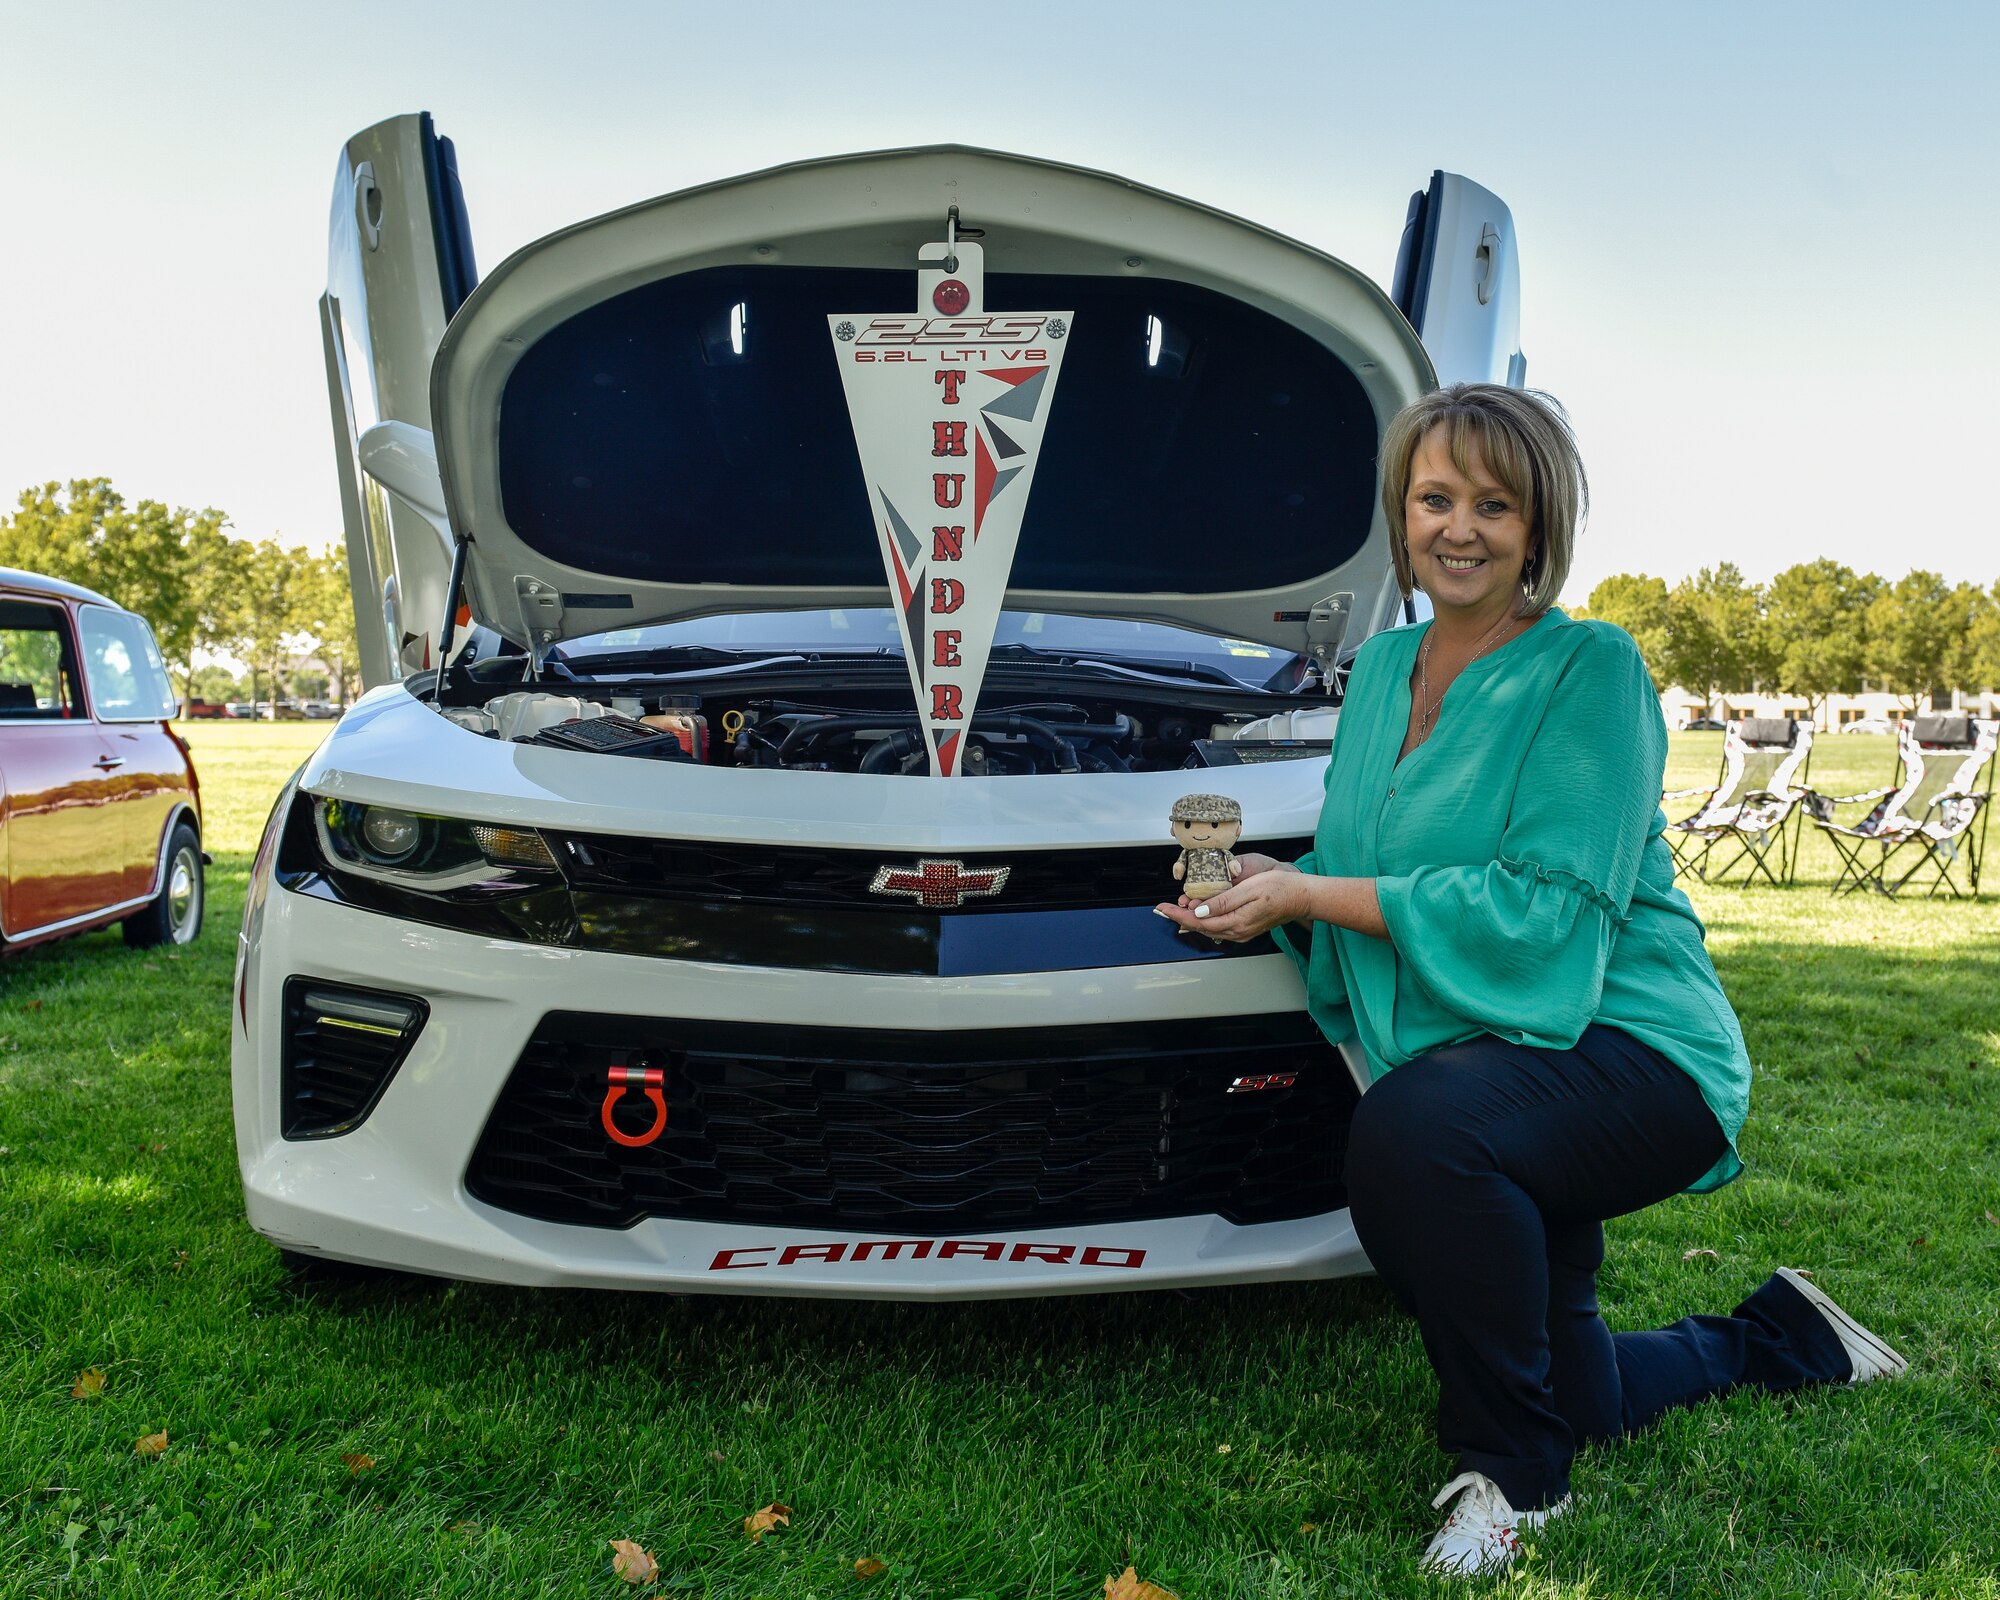 Renate Schuler, participant in the Hispanic Heritage Month festival car show, poses for a photo next to her car ‘Thunder’ at Kirtland Air Force Base, N.M., Oct. 3, 2019. Schuler’s doll dressed in uniform represents her son who is currently serving in the U.S Air Force. (U.S. Air Force photo by Airman 1st Class Austin J. Prisbrey)